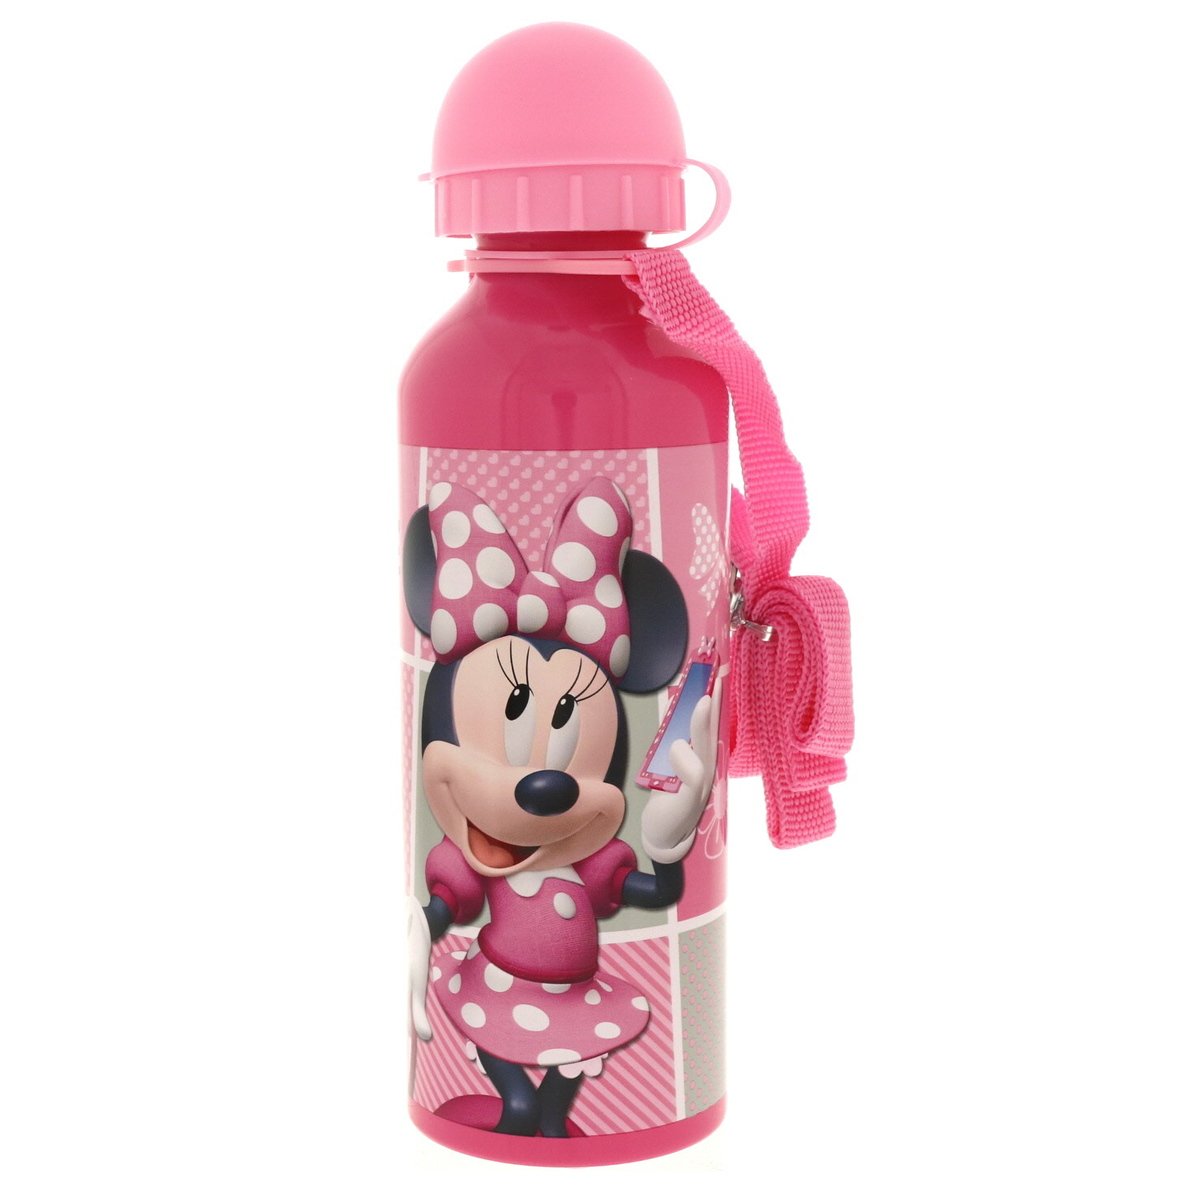 Minnie Mouse Water Bottle 112-15-0911